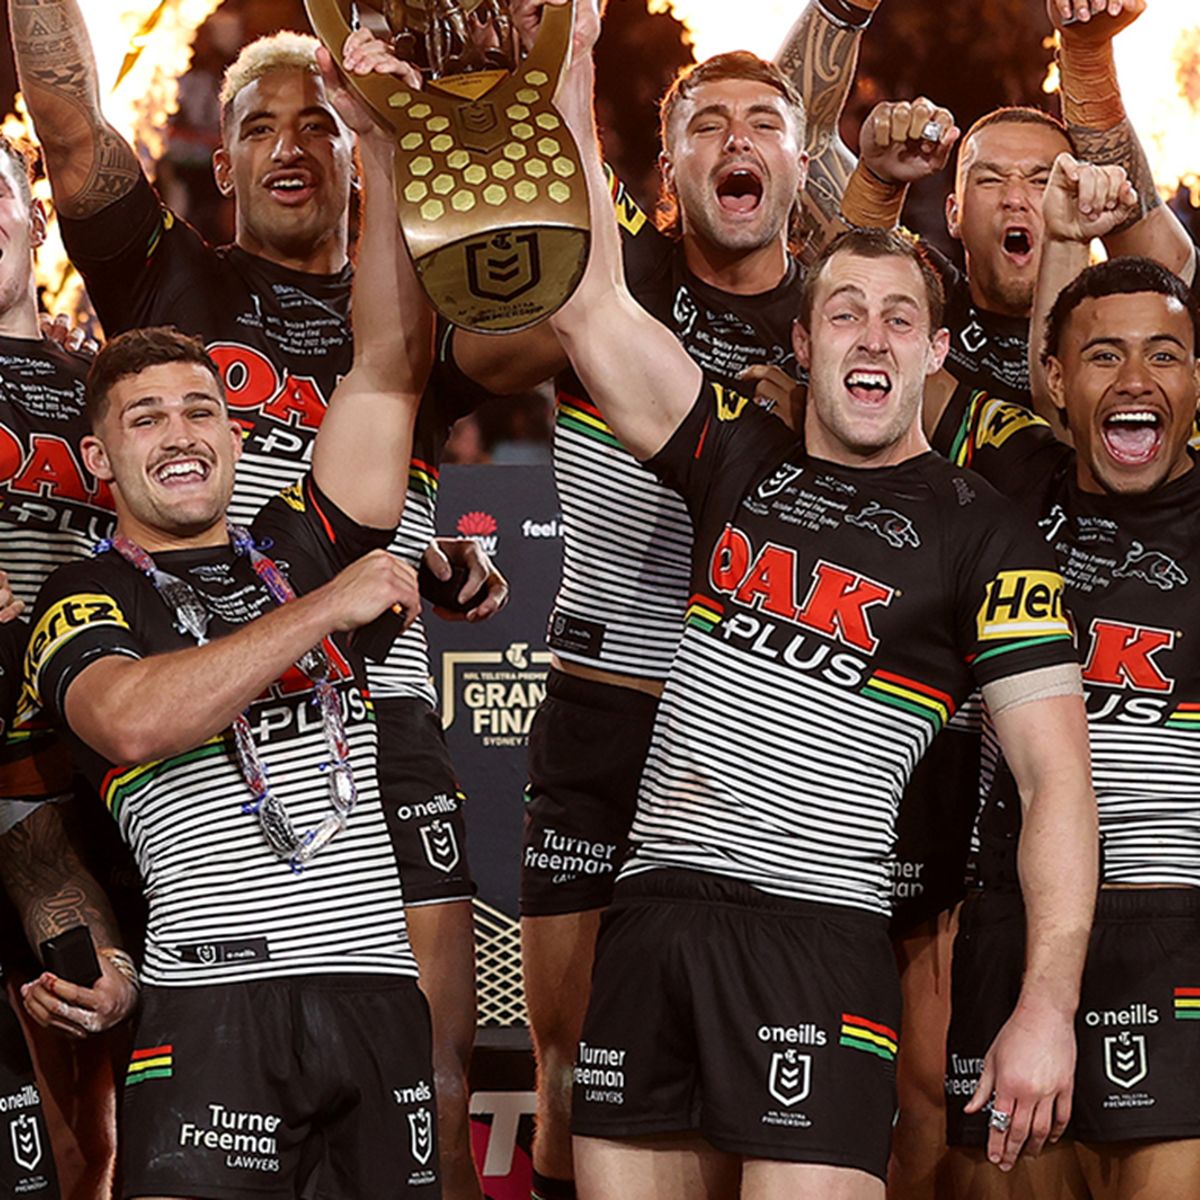 NRL Draw 2023: Warriors let down clubs, draw, schedule, home games